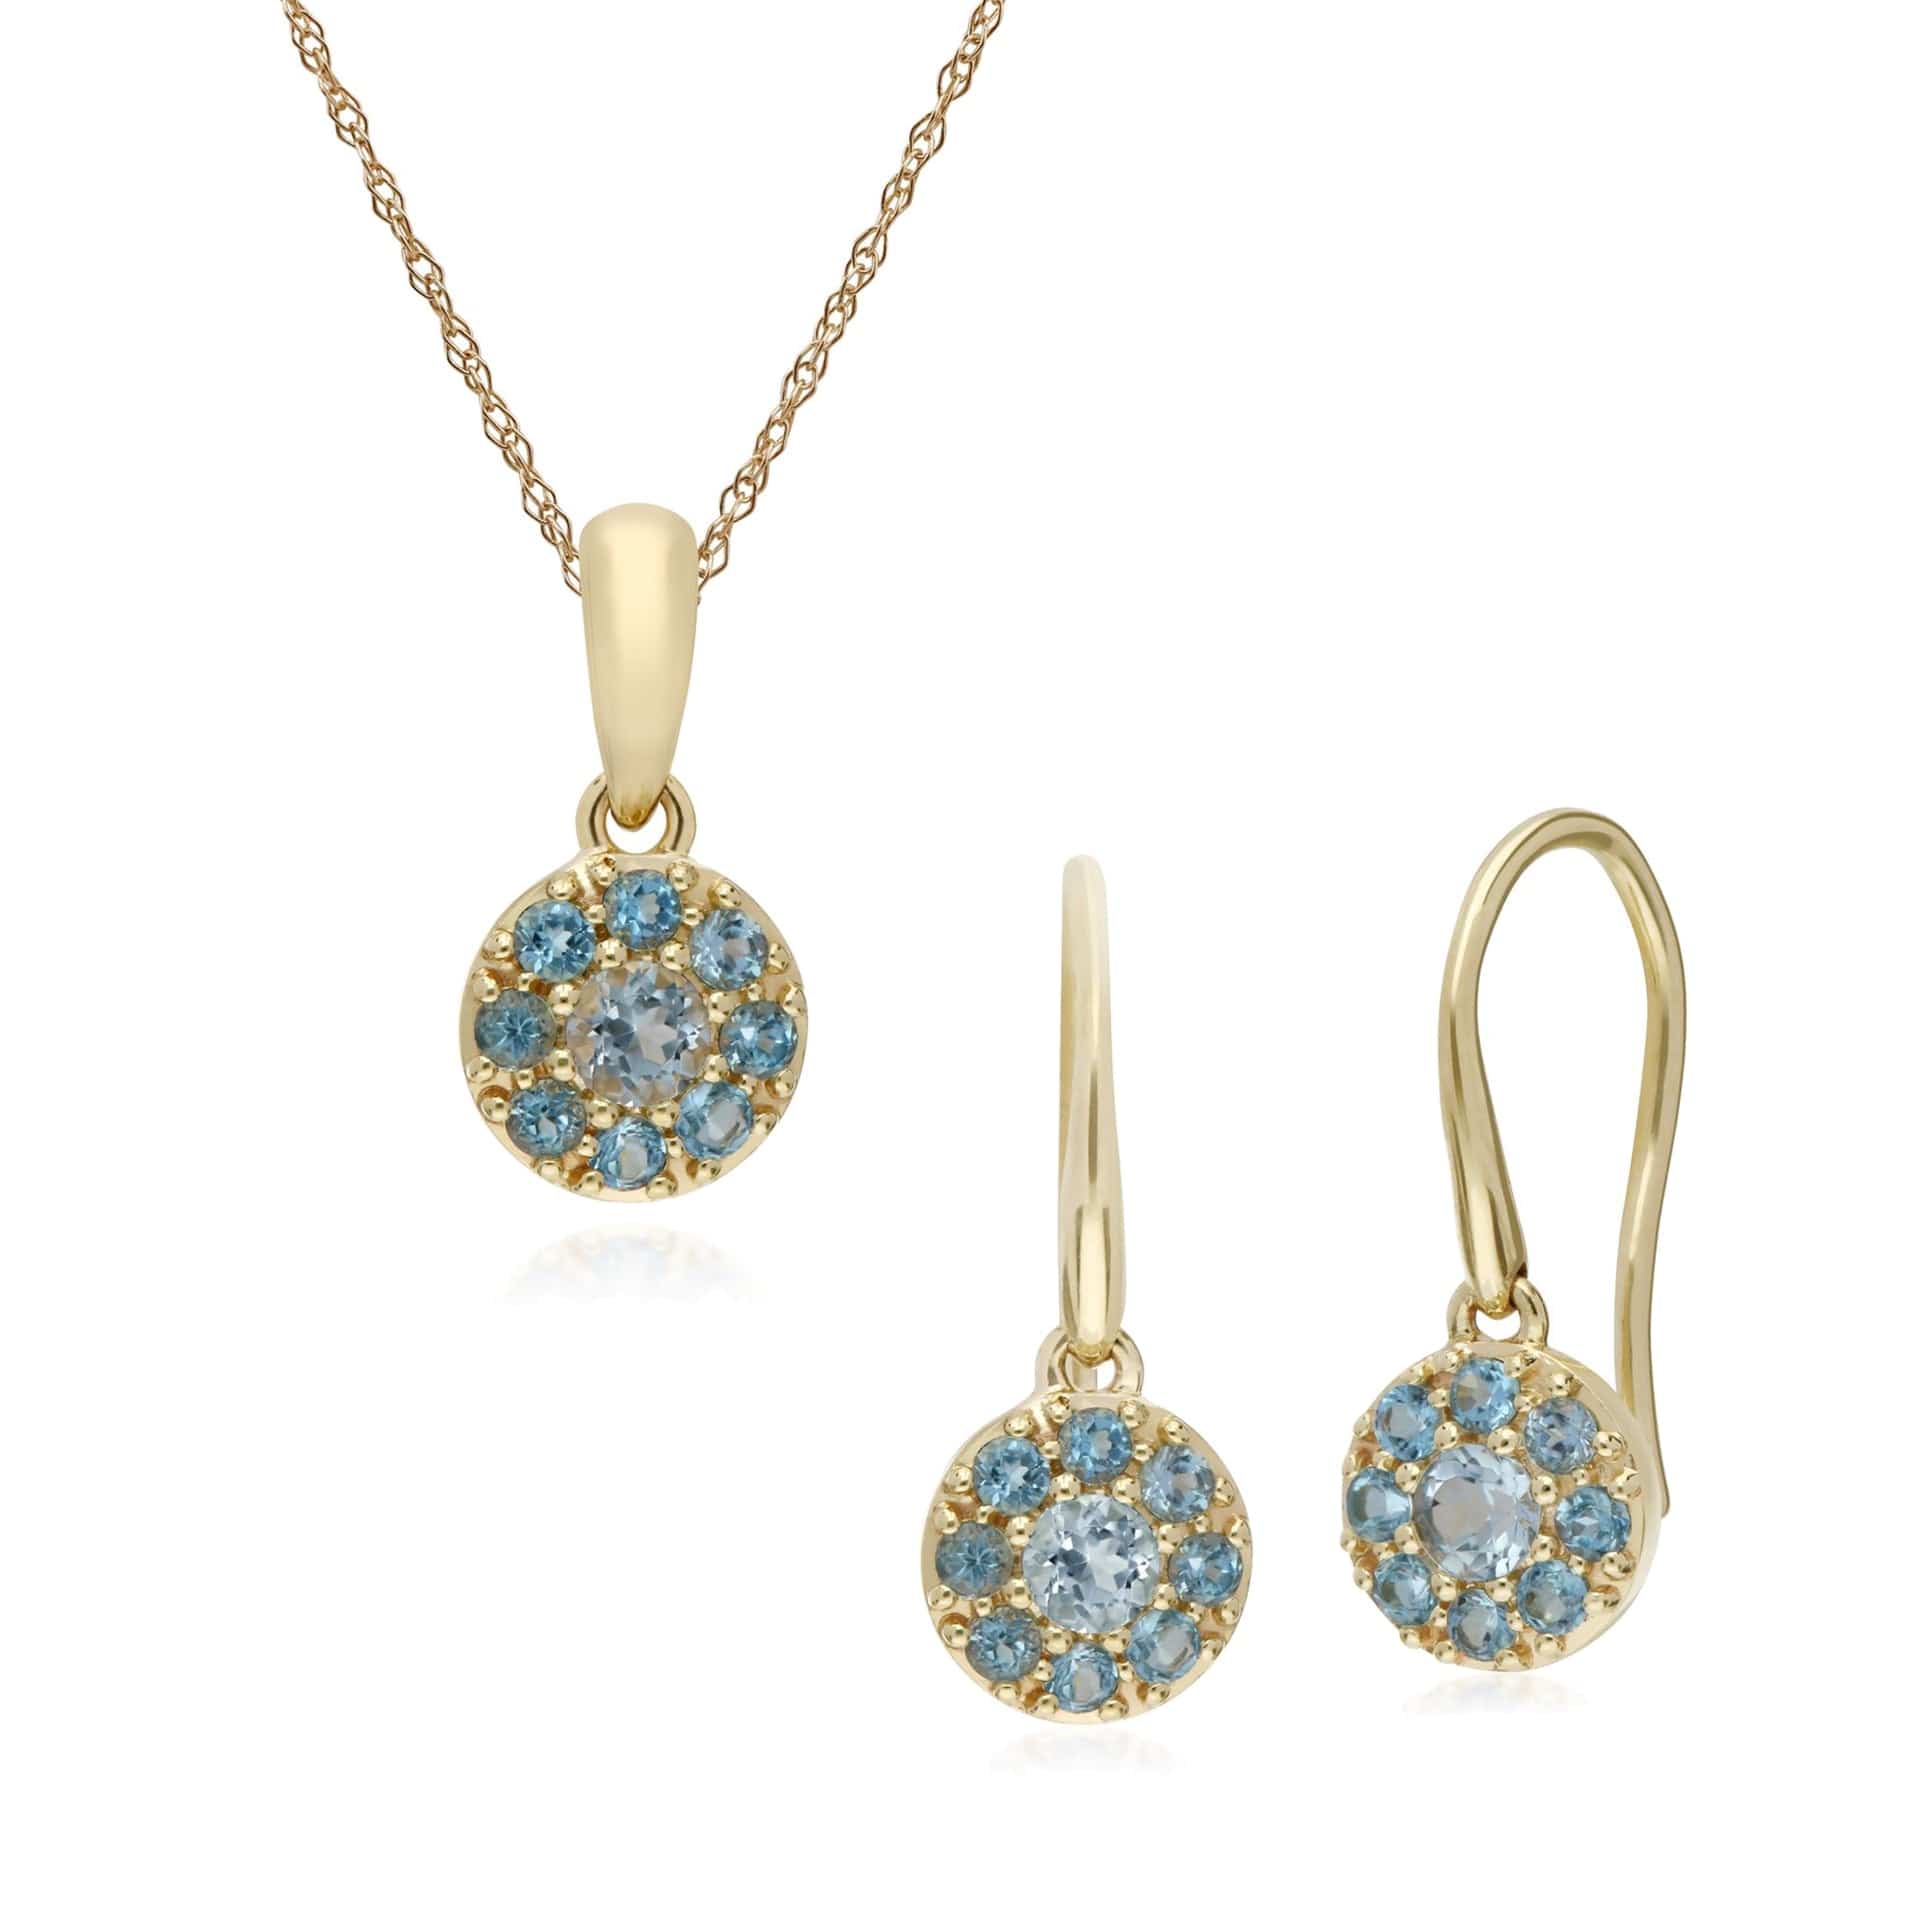 135E1573059-135P1910059 Classic Round Blue Topaz Cluster Drop Earrings & Pendant Set in 9ct Yellow Gold 1